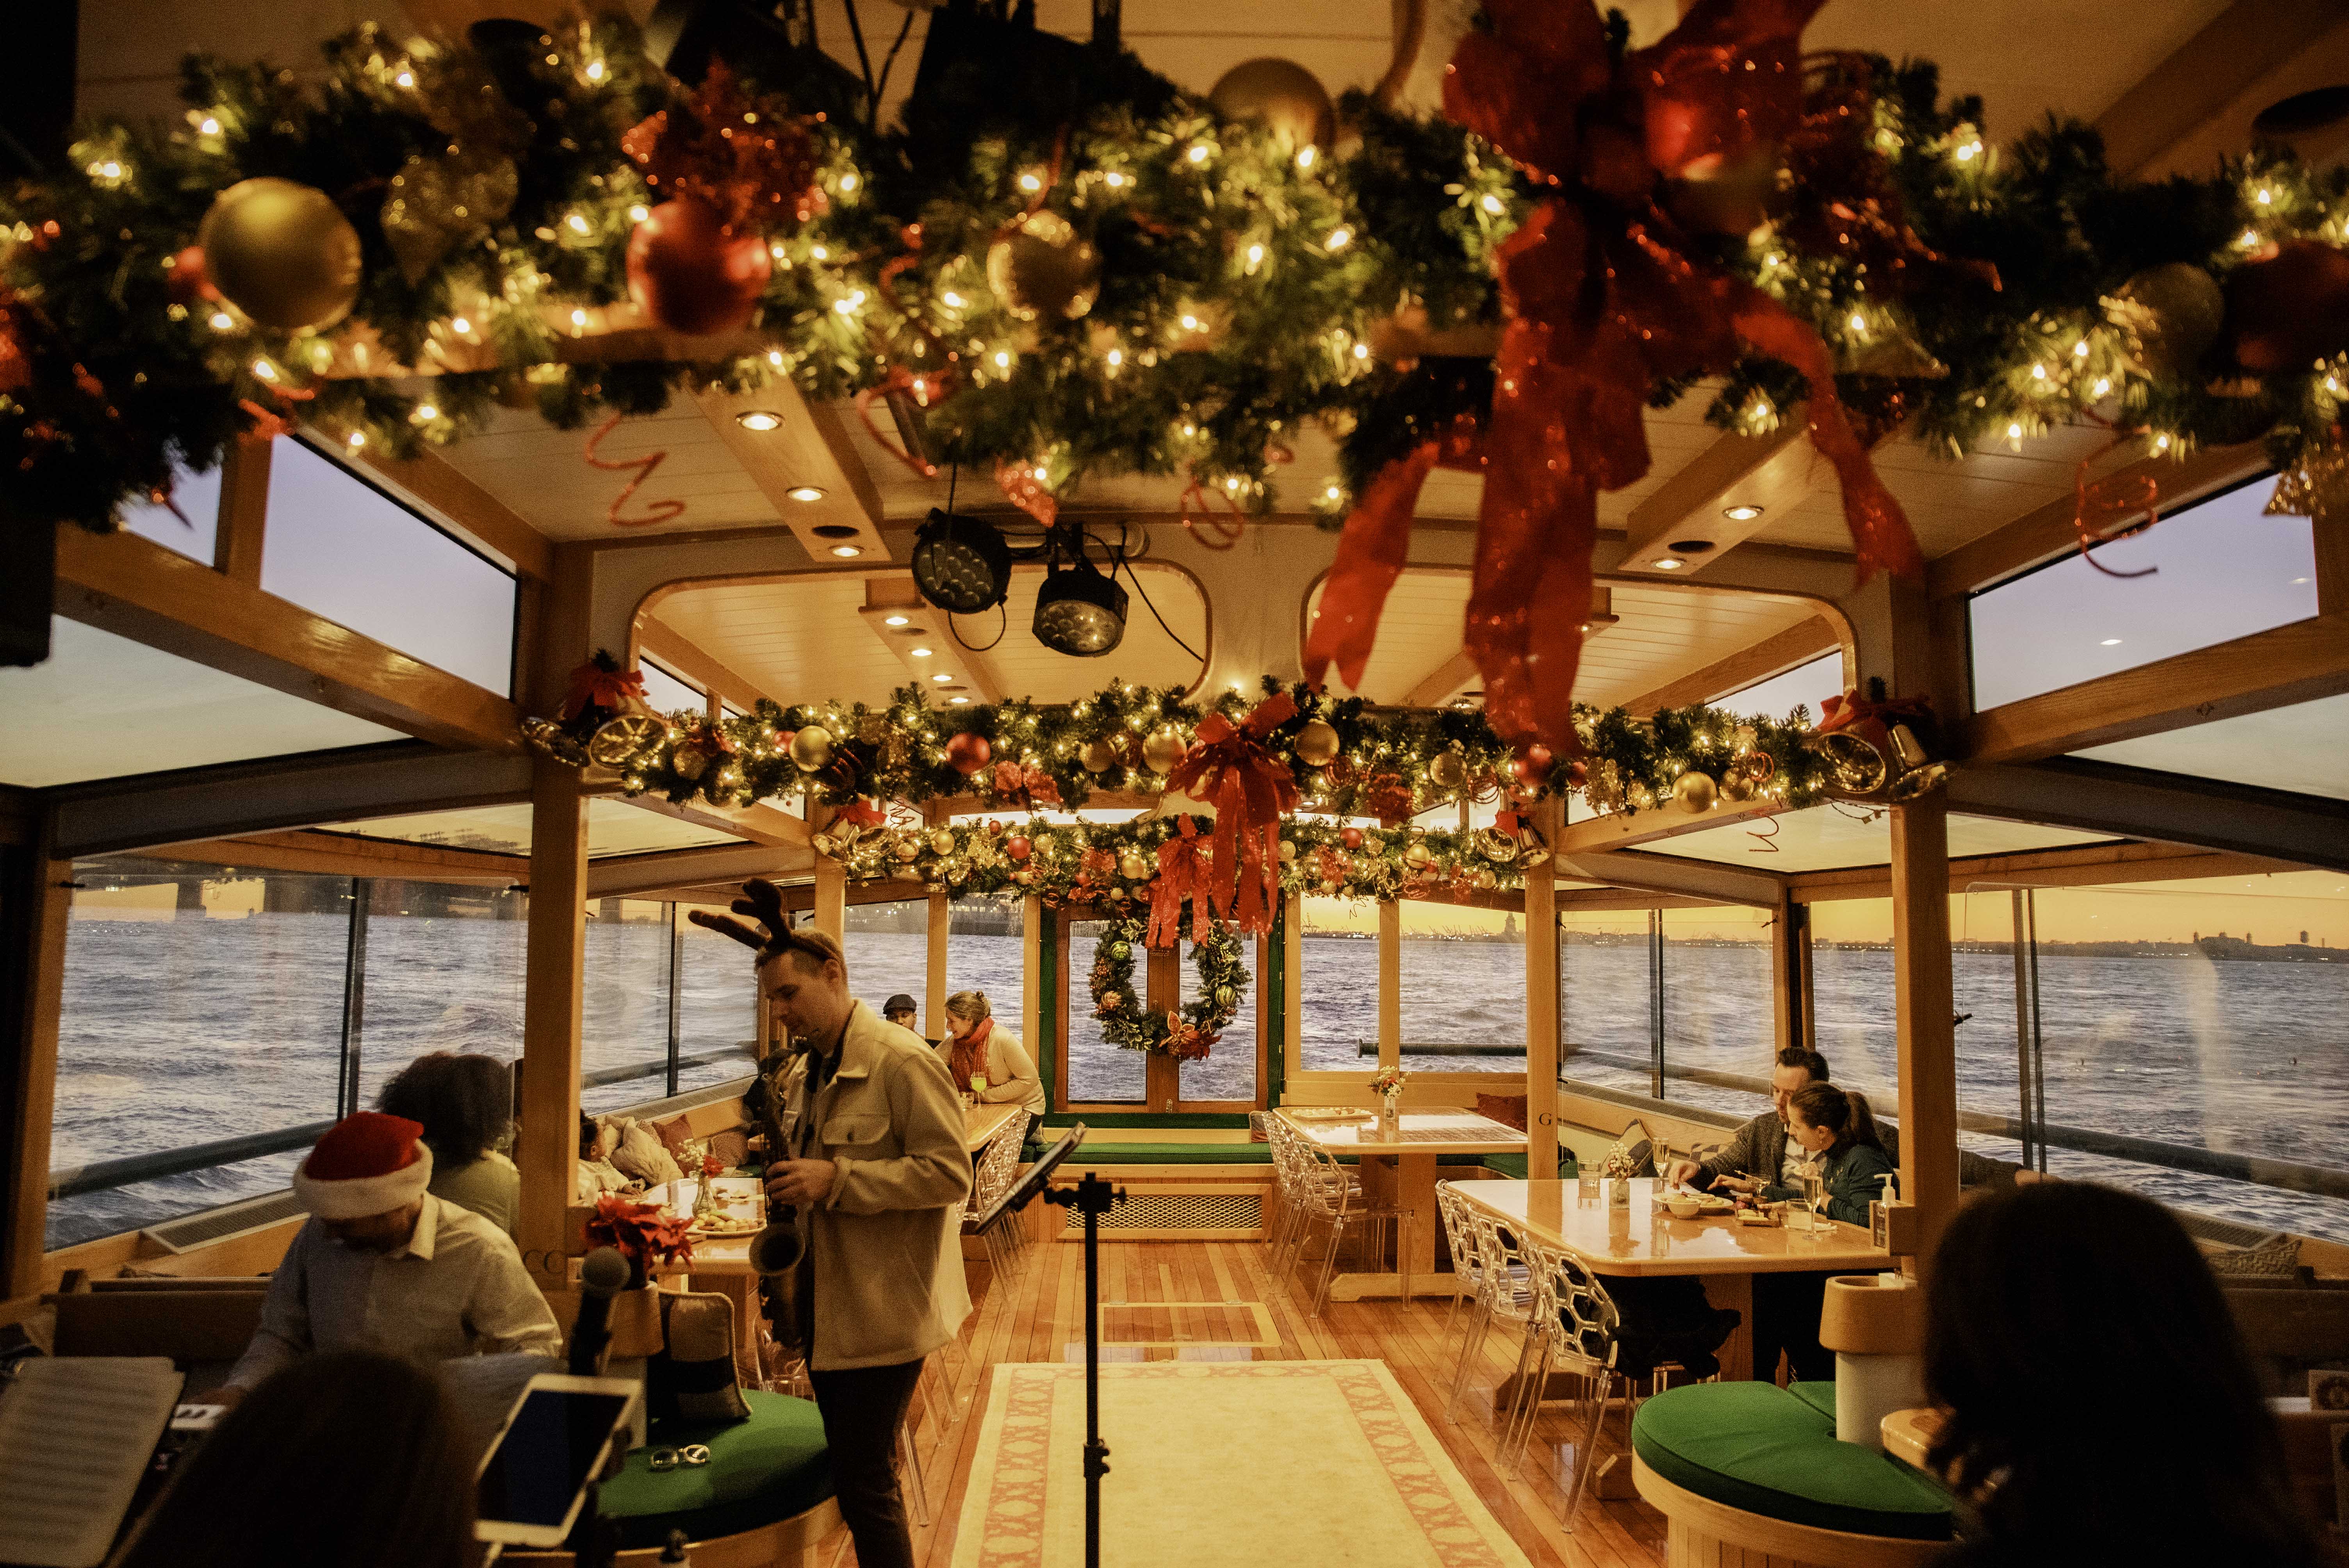 Gathering of people inside enjoying live holiday music at sunset aboard the yacht Manhattan II 